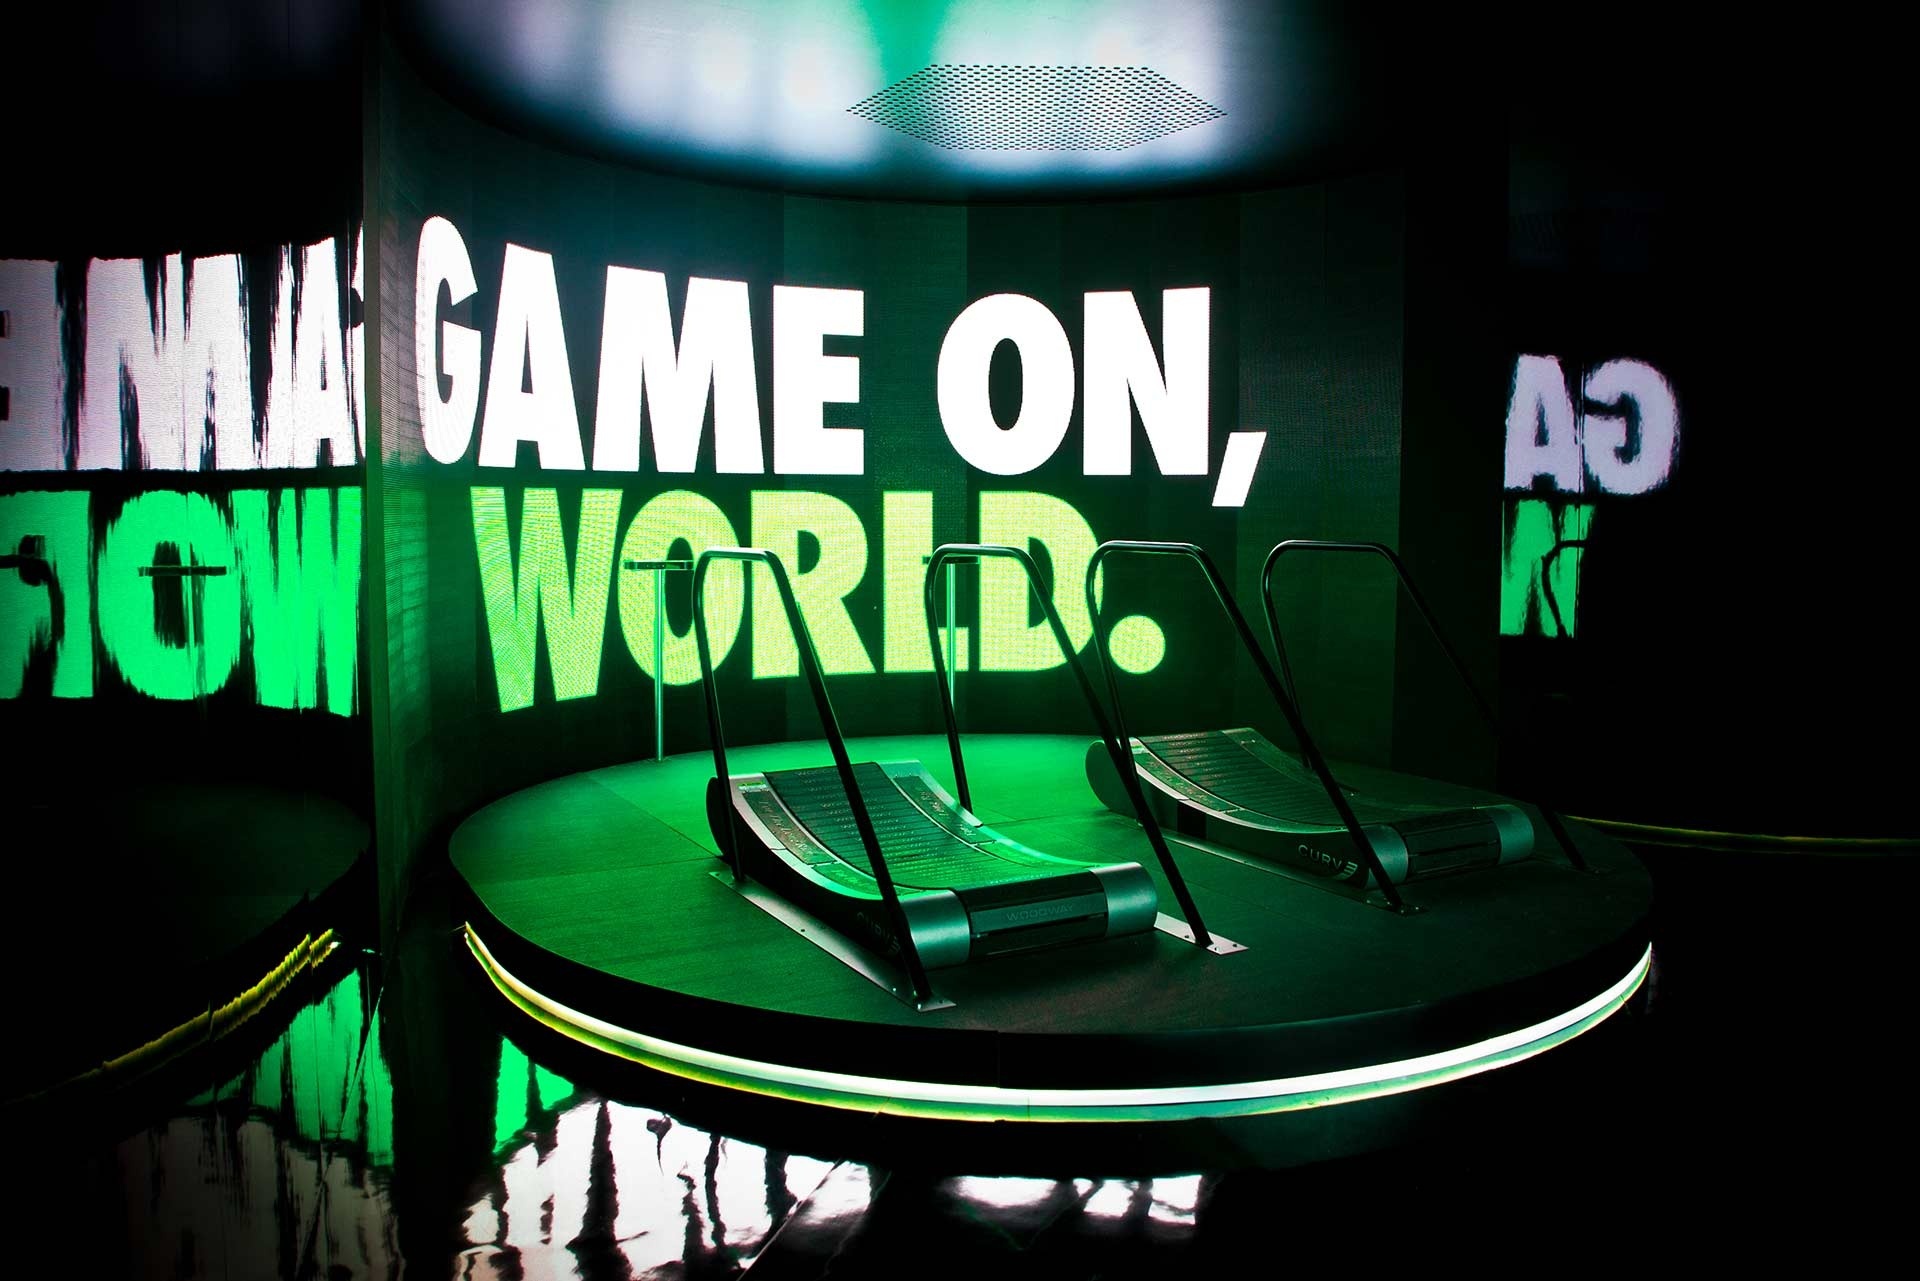 Two treadmills on a raised platform against a screen that says "Game on, world" and reflects neon green light onto the platform